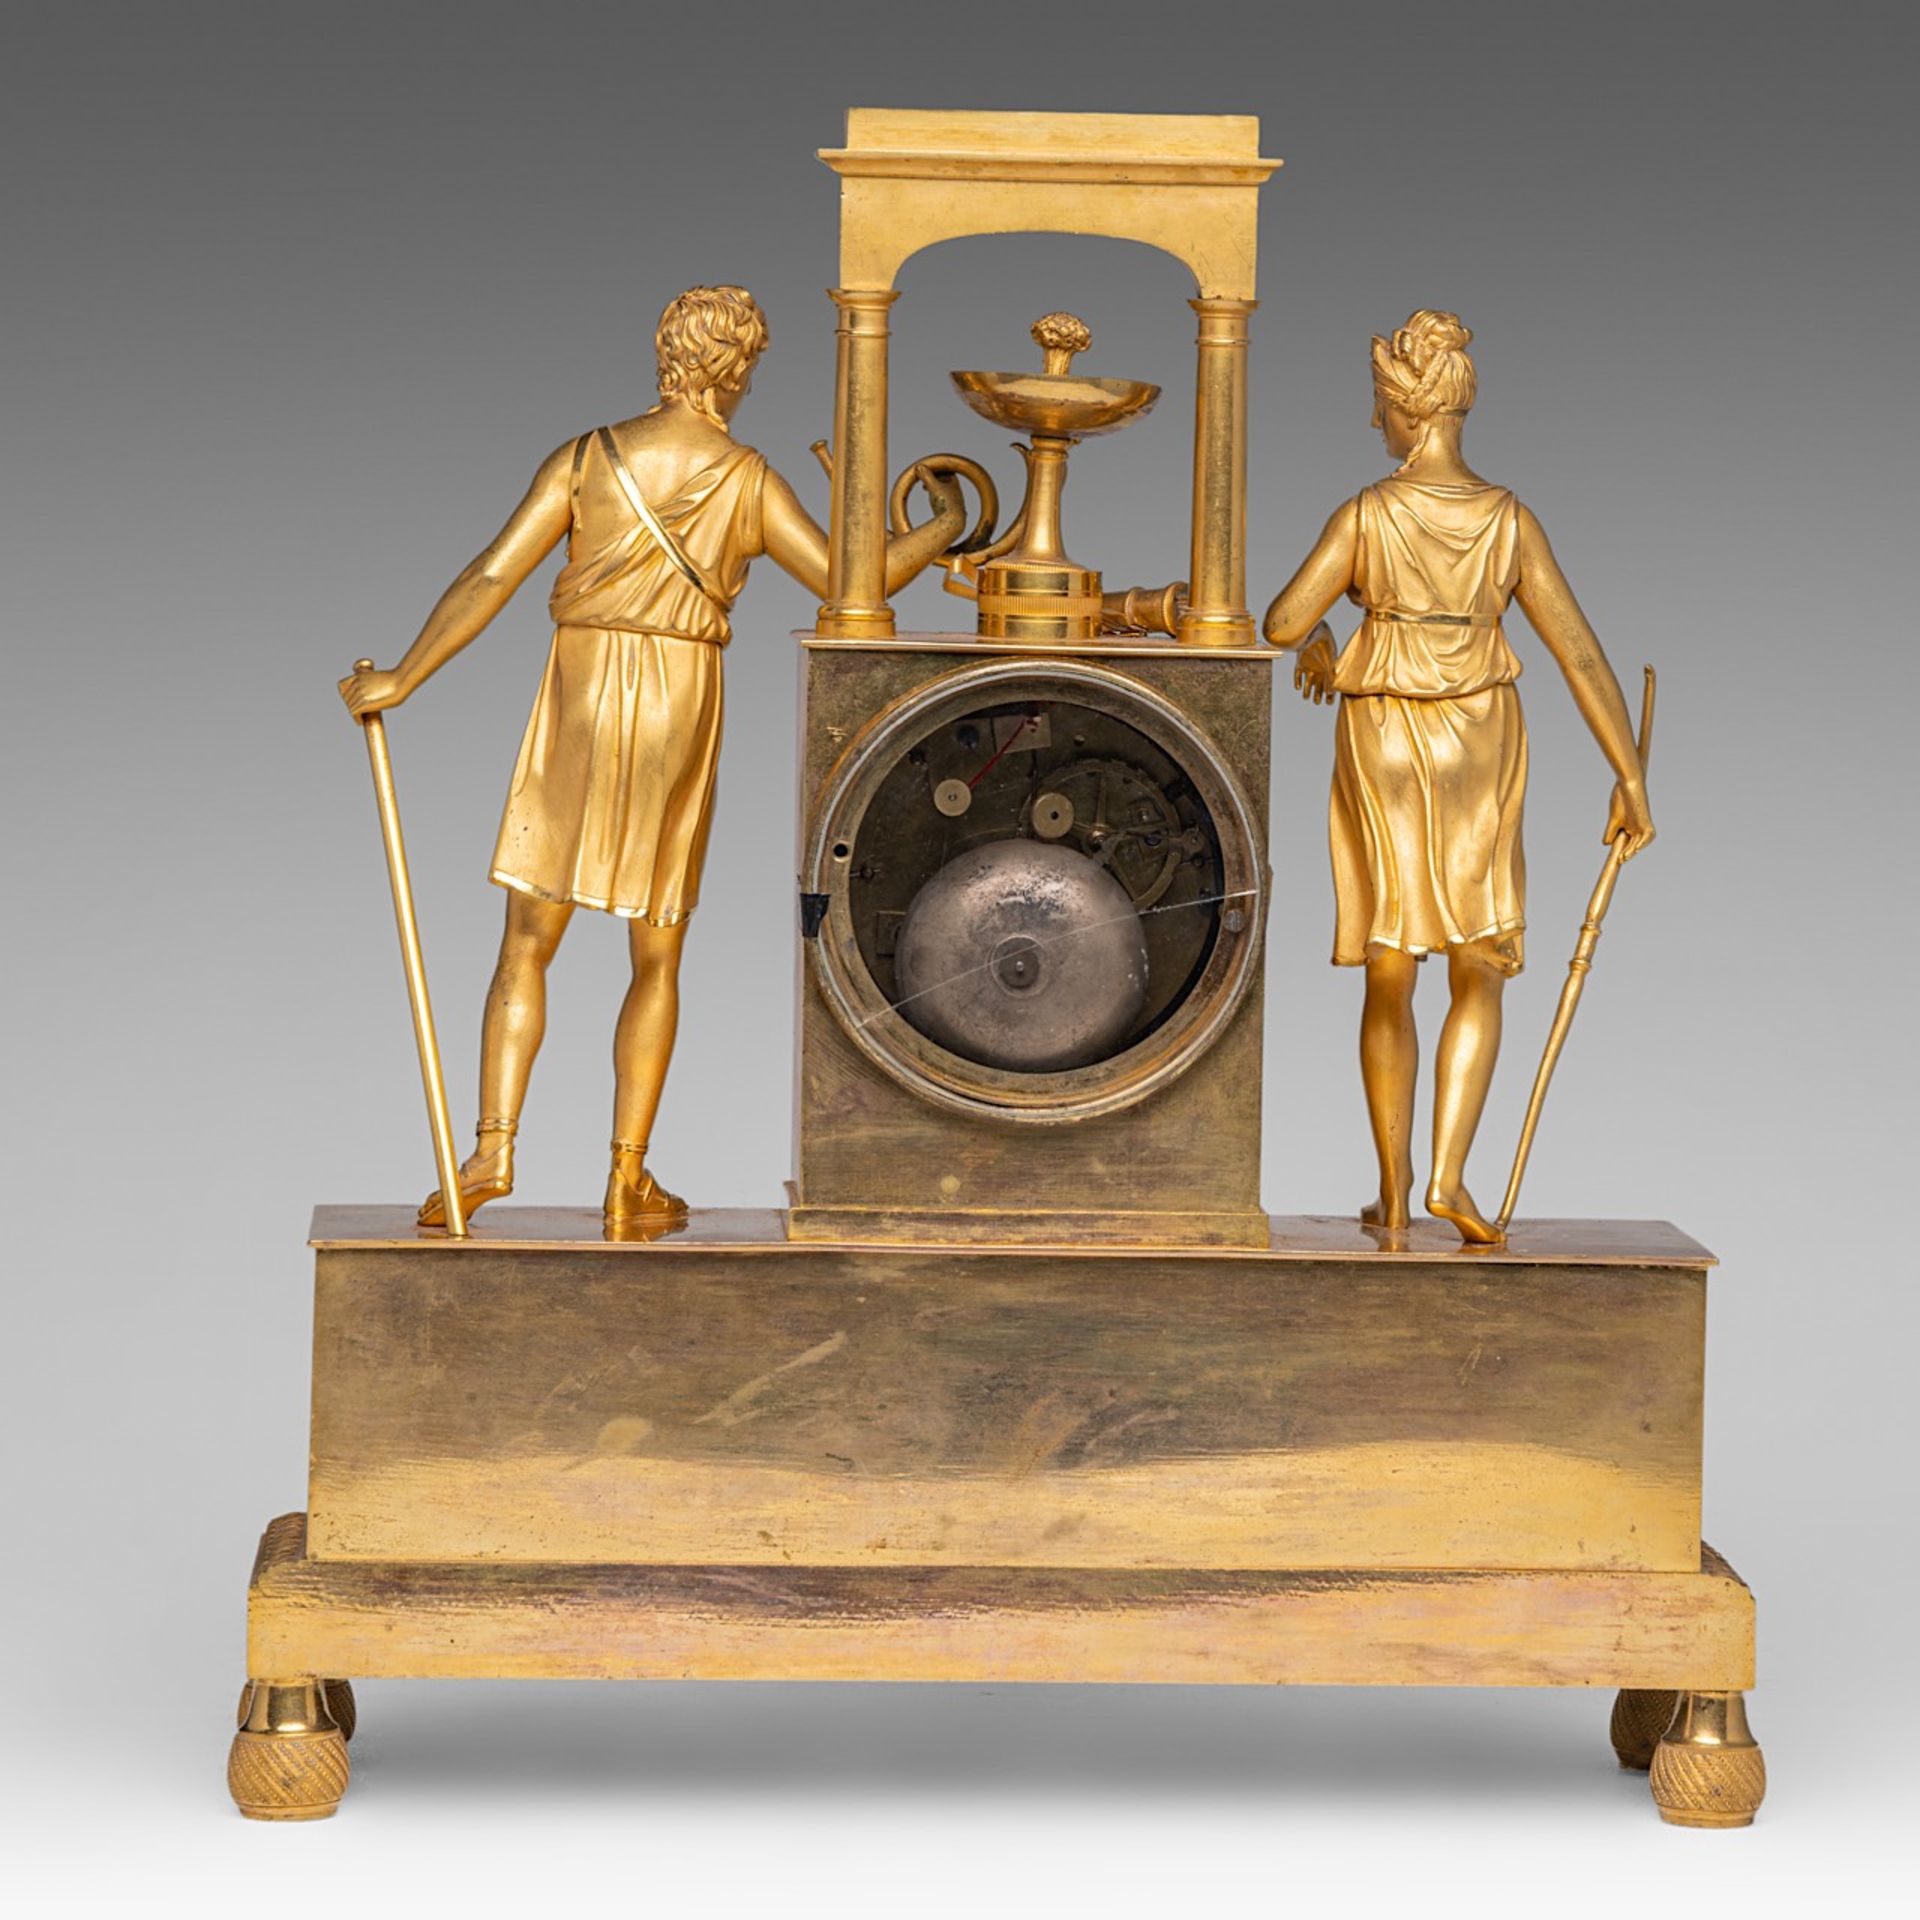 A gilt bronze French Restauration mantle clock with hunting theme, H 40 - W 36 cm - Image 4 of 7